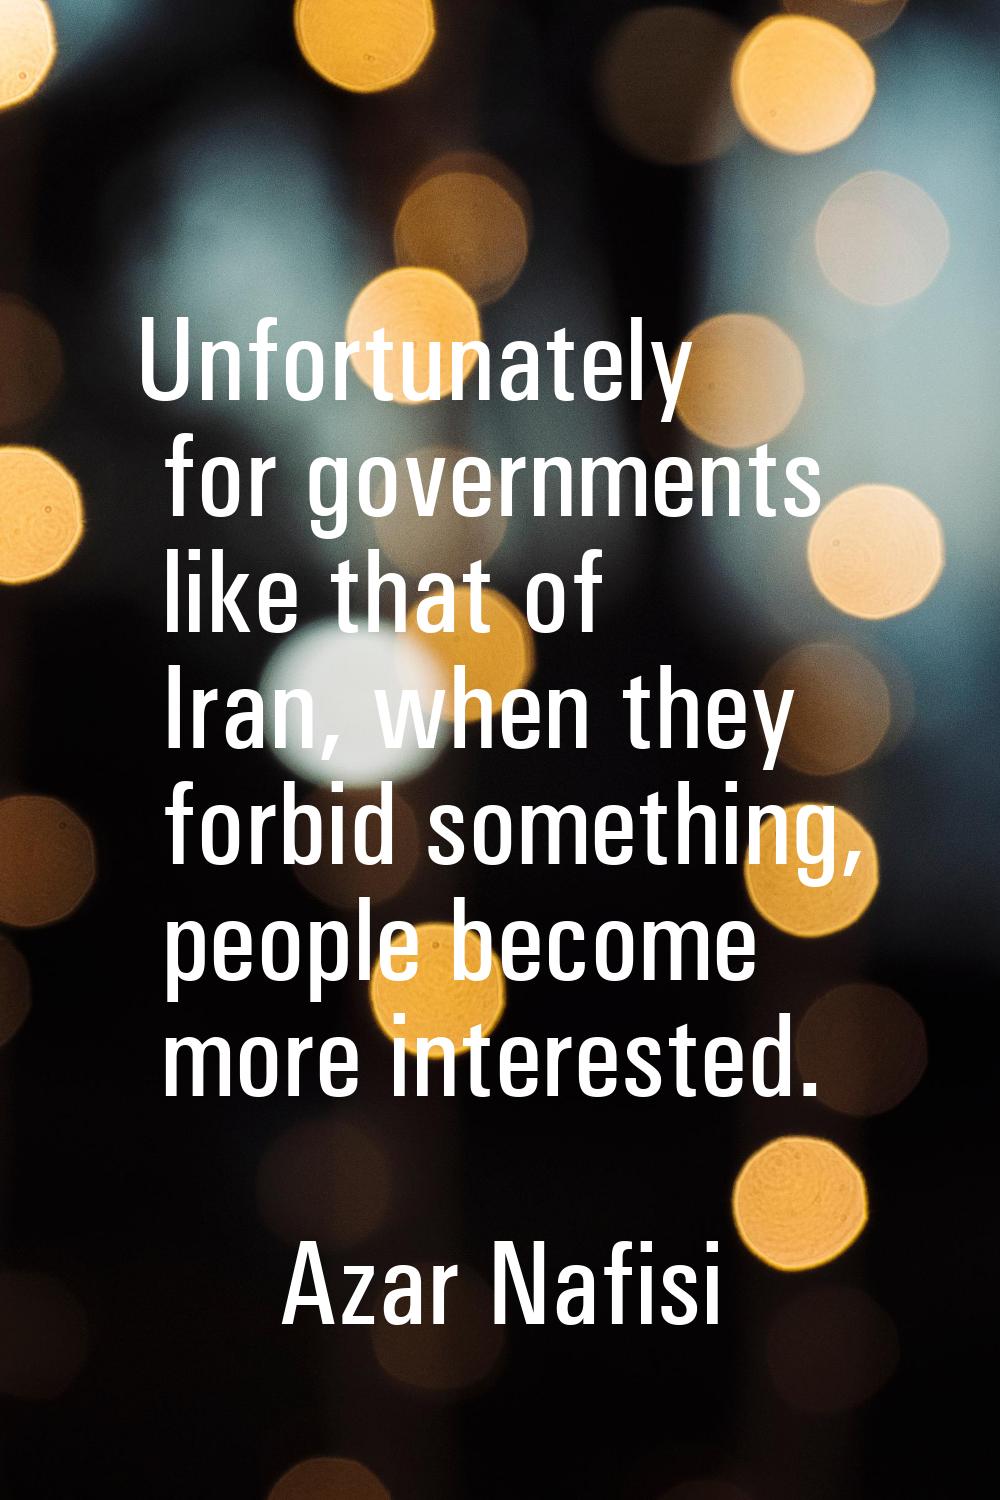 Unfortunately for governments like that of Iran, when they forbid something, people become more int